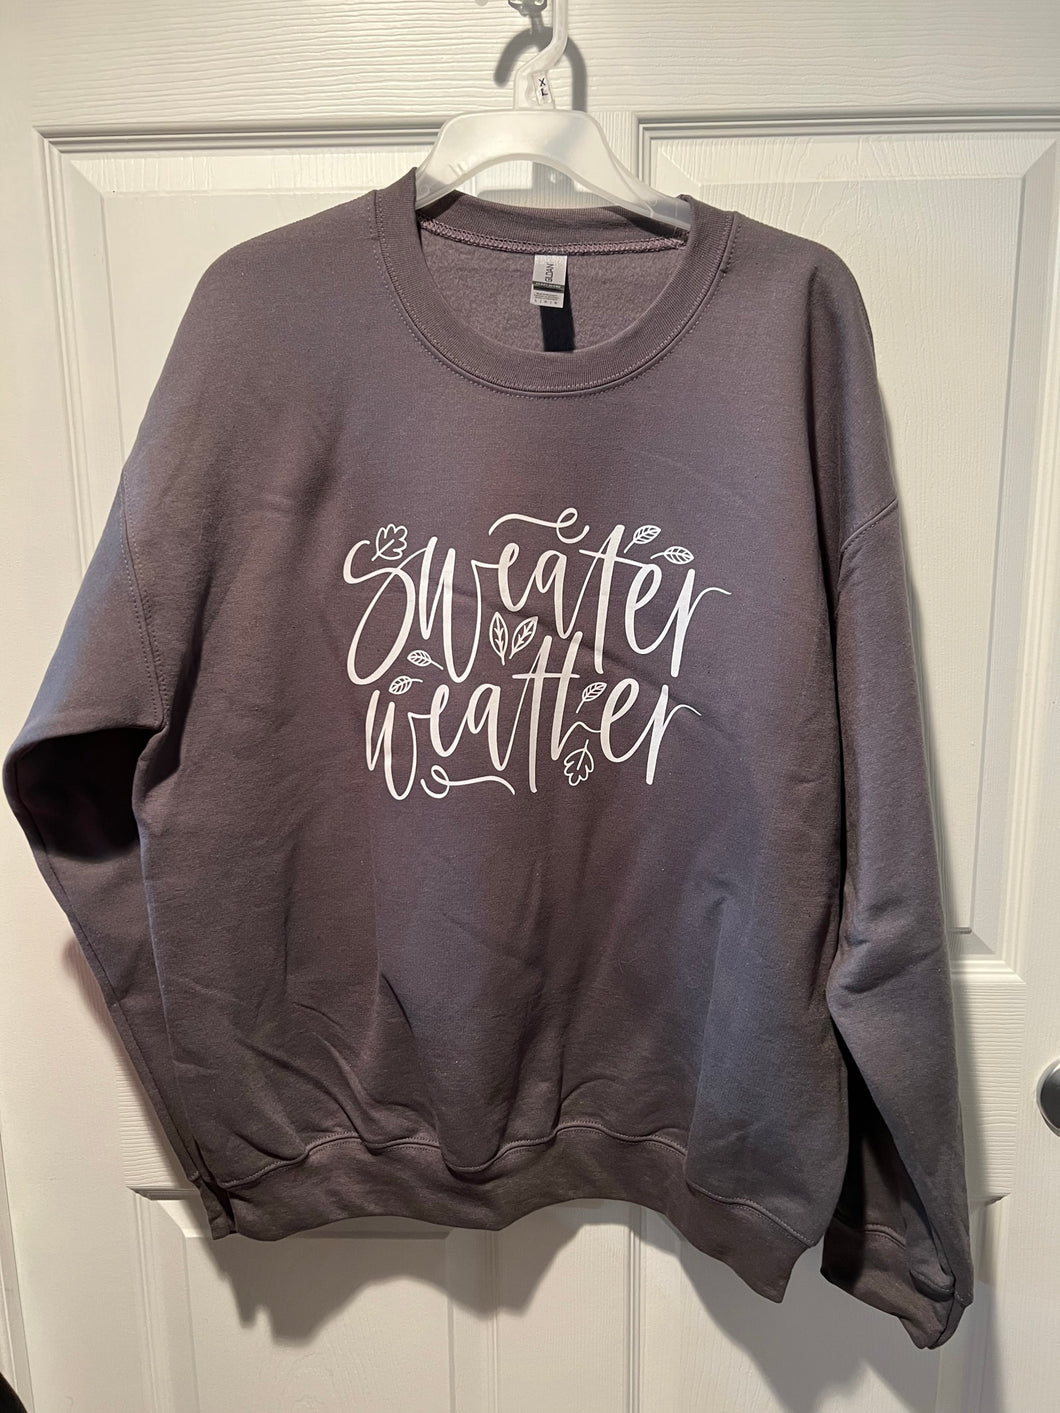 Sweater Weather Crew - Size Large